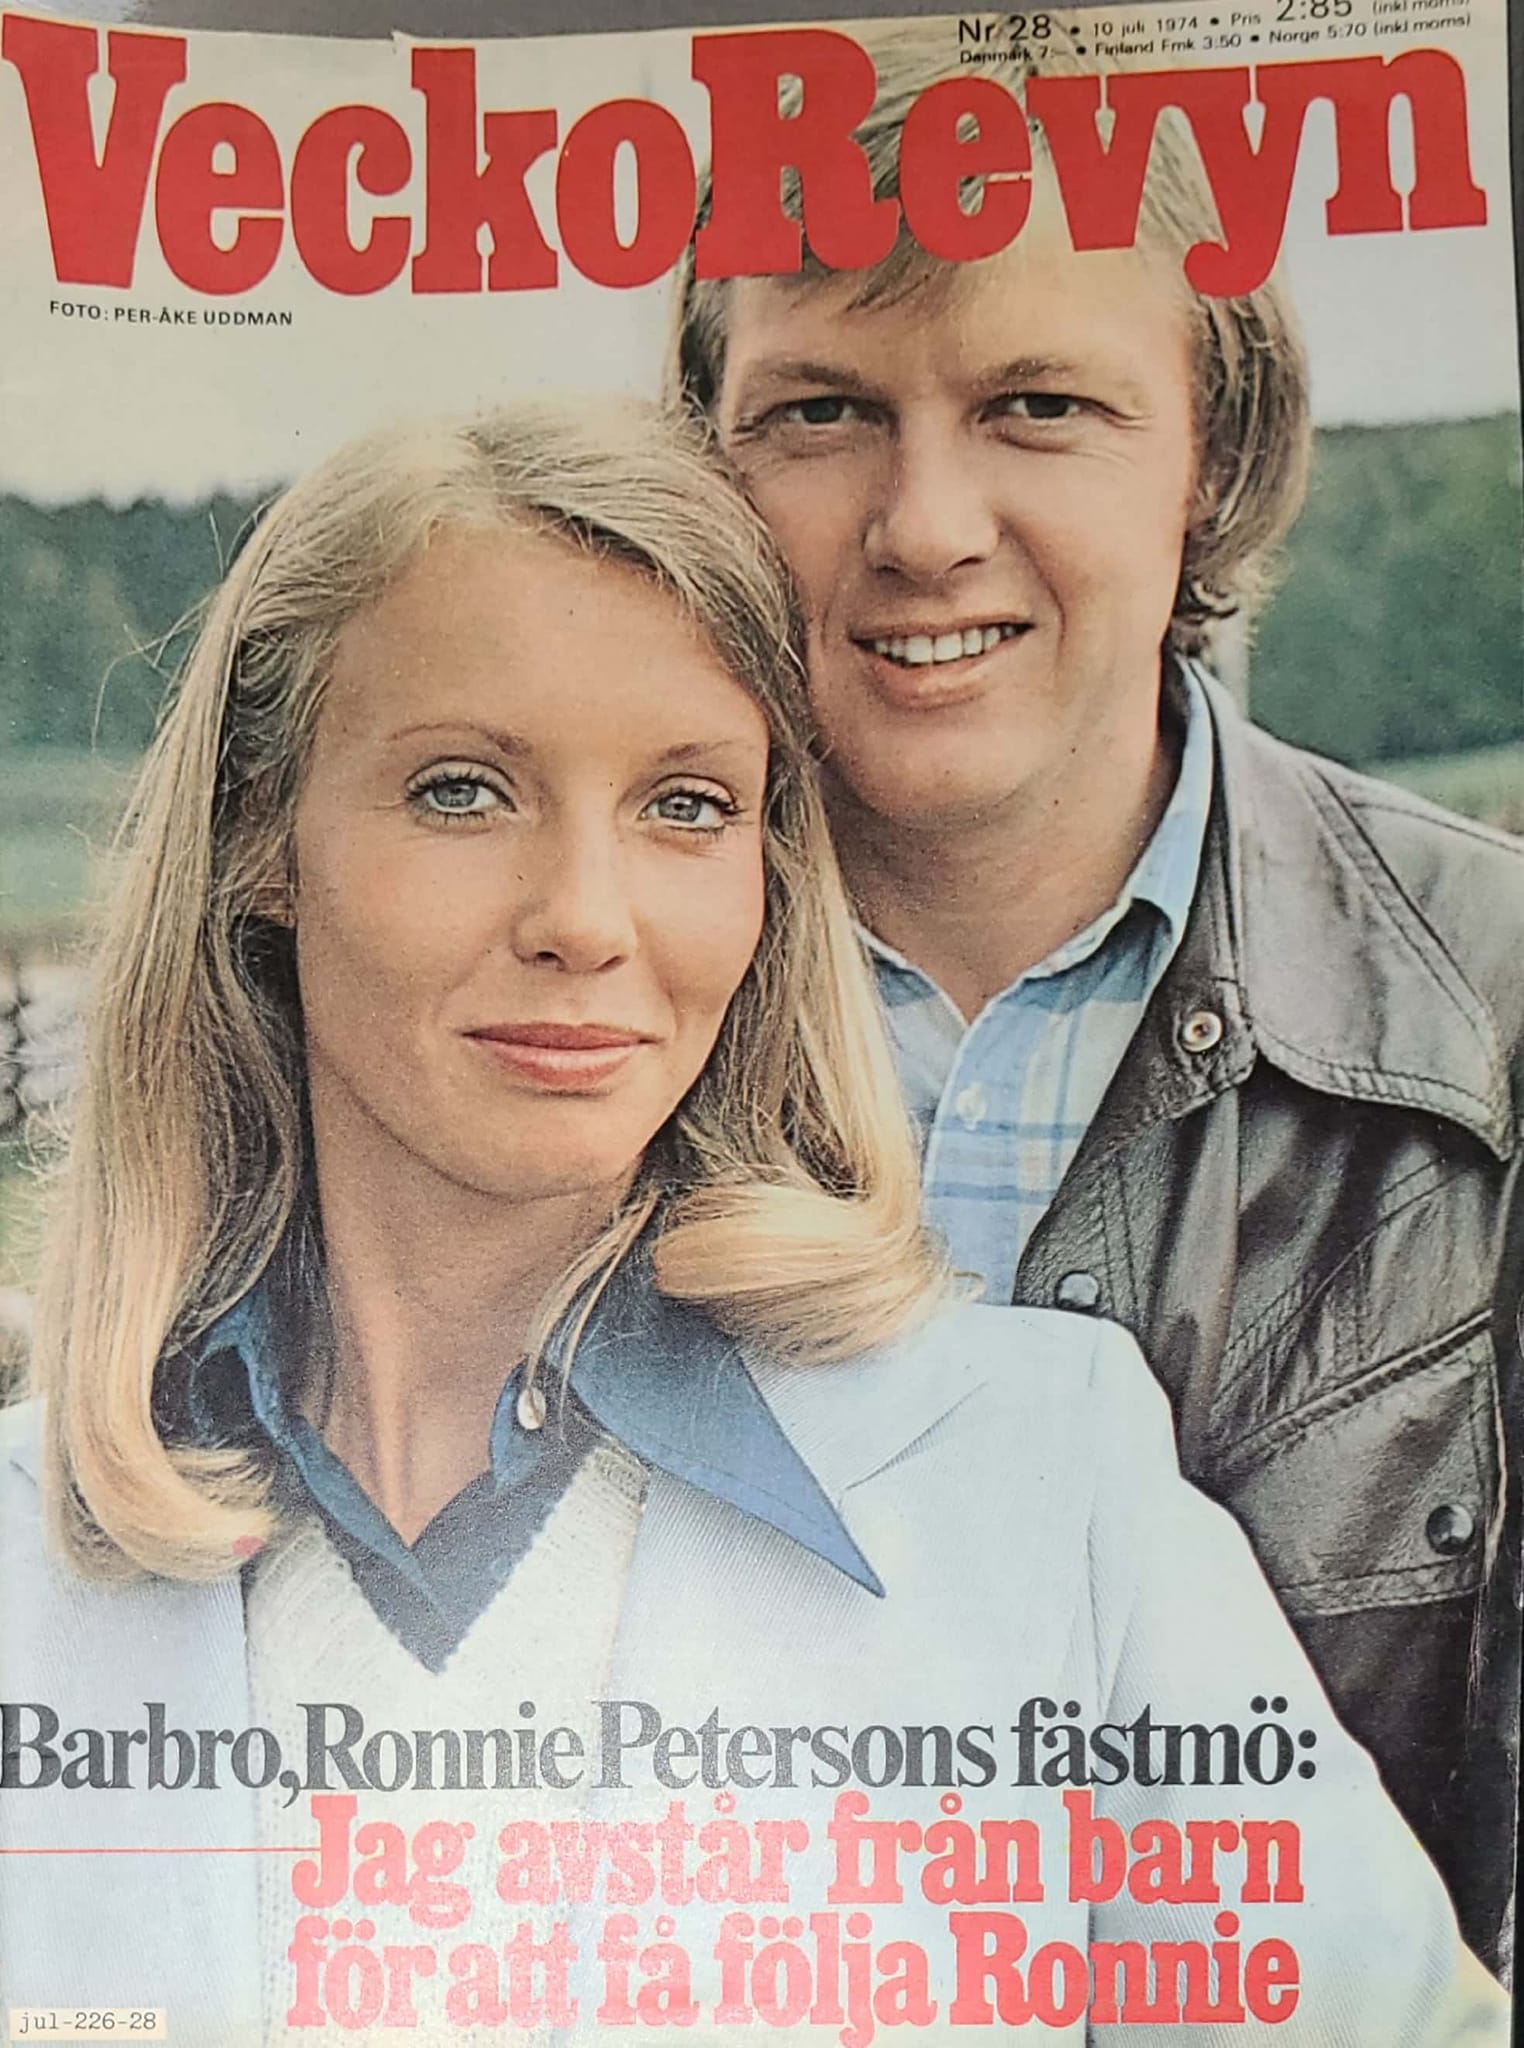 Ronnie and Barbro Peterson on the cover of a magazine on 10 July 1974.